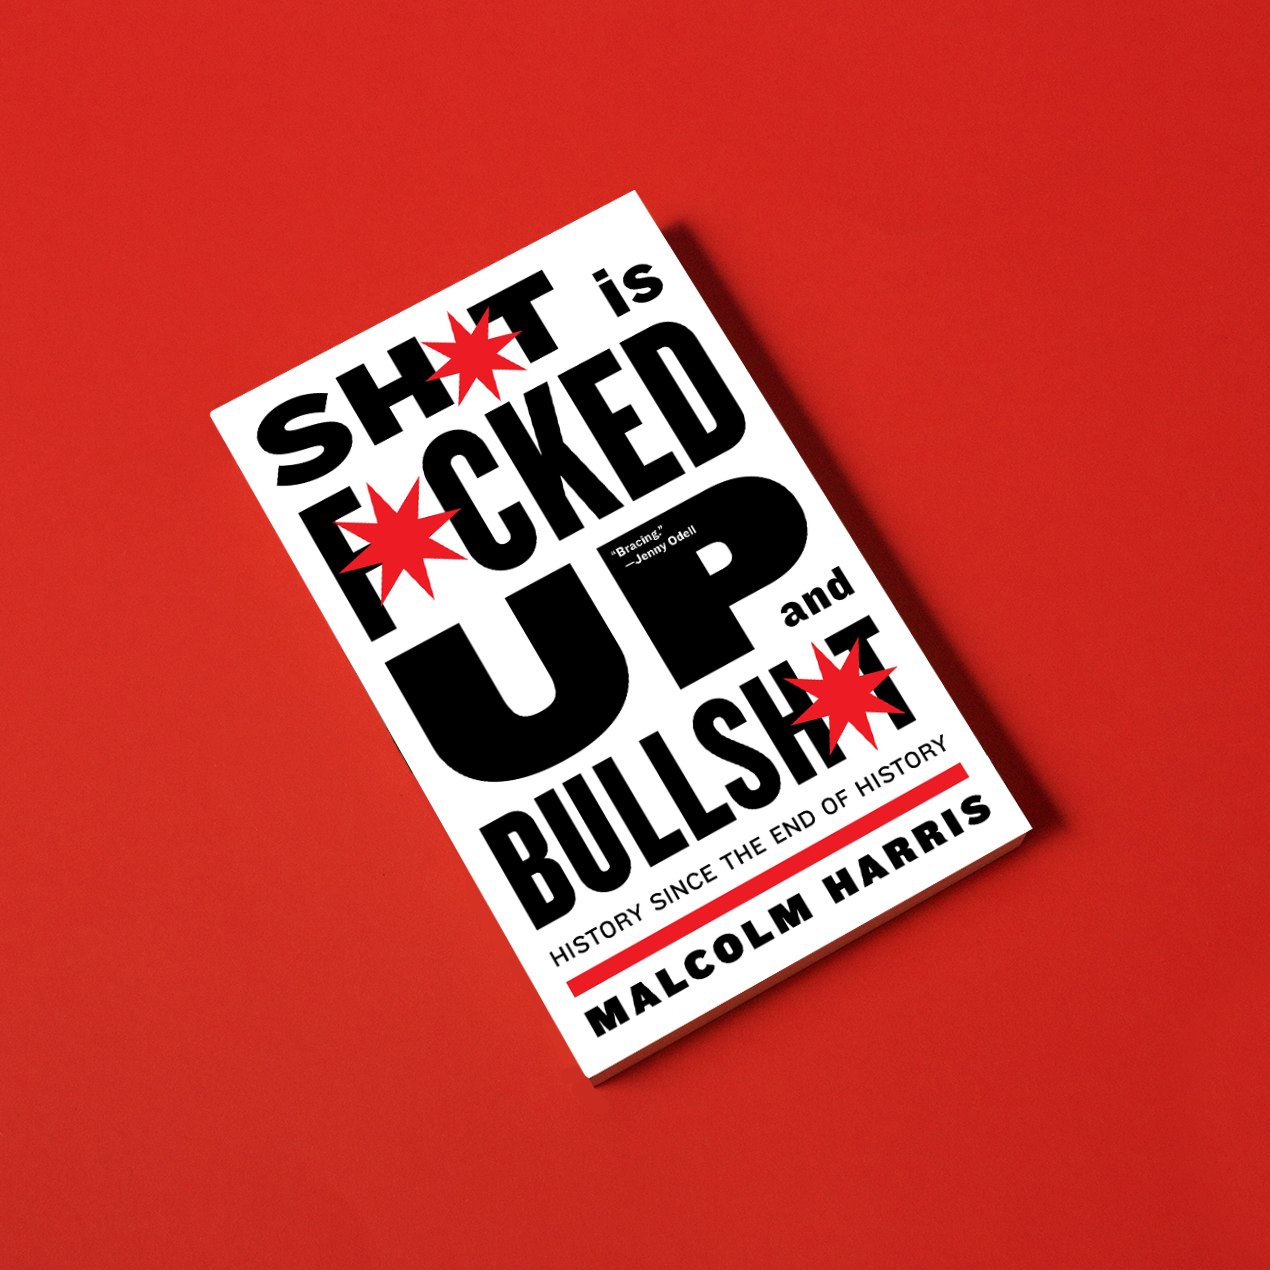 Shit Is Fucked Up and Bullshit, by Malcolm Harris